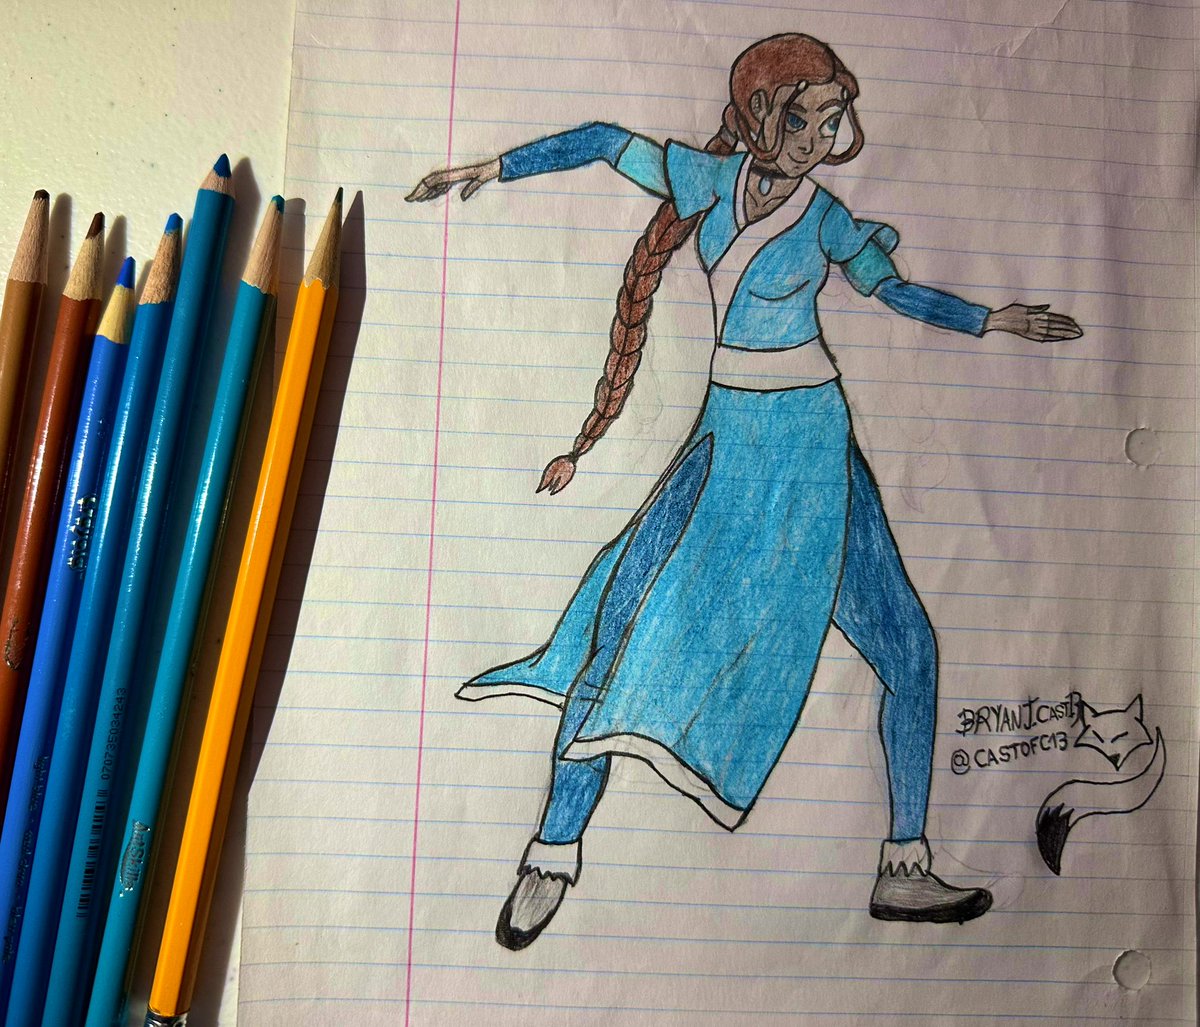 I drew my favorite water bender from the southern water tribe Katara🫴🏽🌊🧊💧
From AVATAR THE LAST AIRBENDER  #AvatarTheLastAirbender #fantart #katara #AvatarTheLastAirbenderfanart #AvatarTheLastAirbenderkatara 
#colorpencildrawing #handdrawm